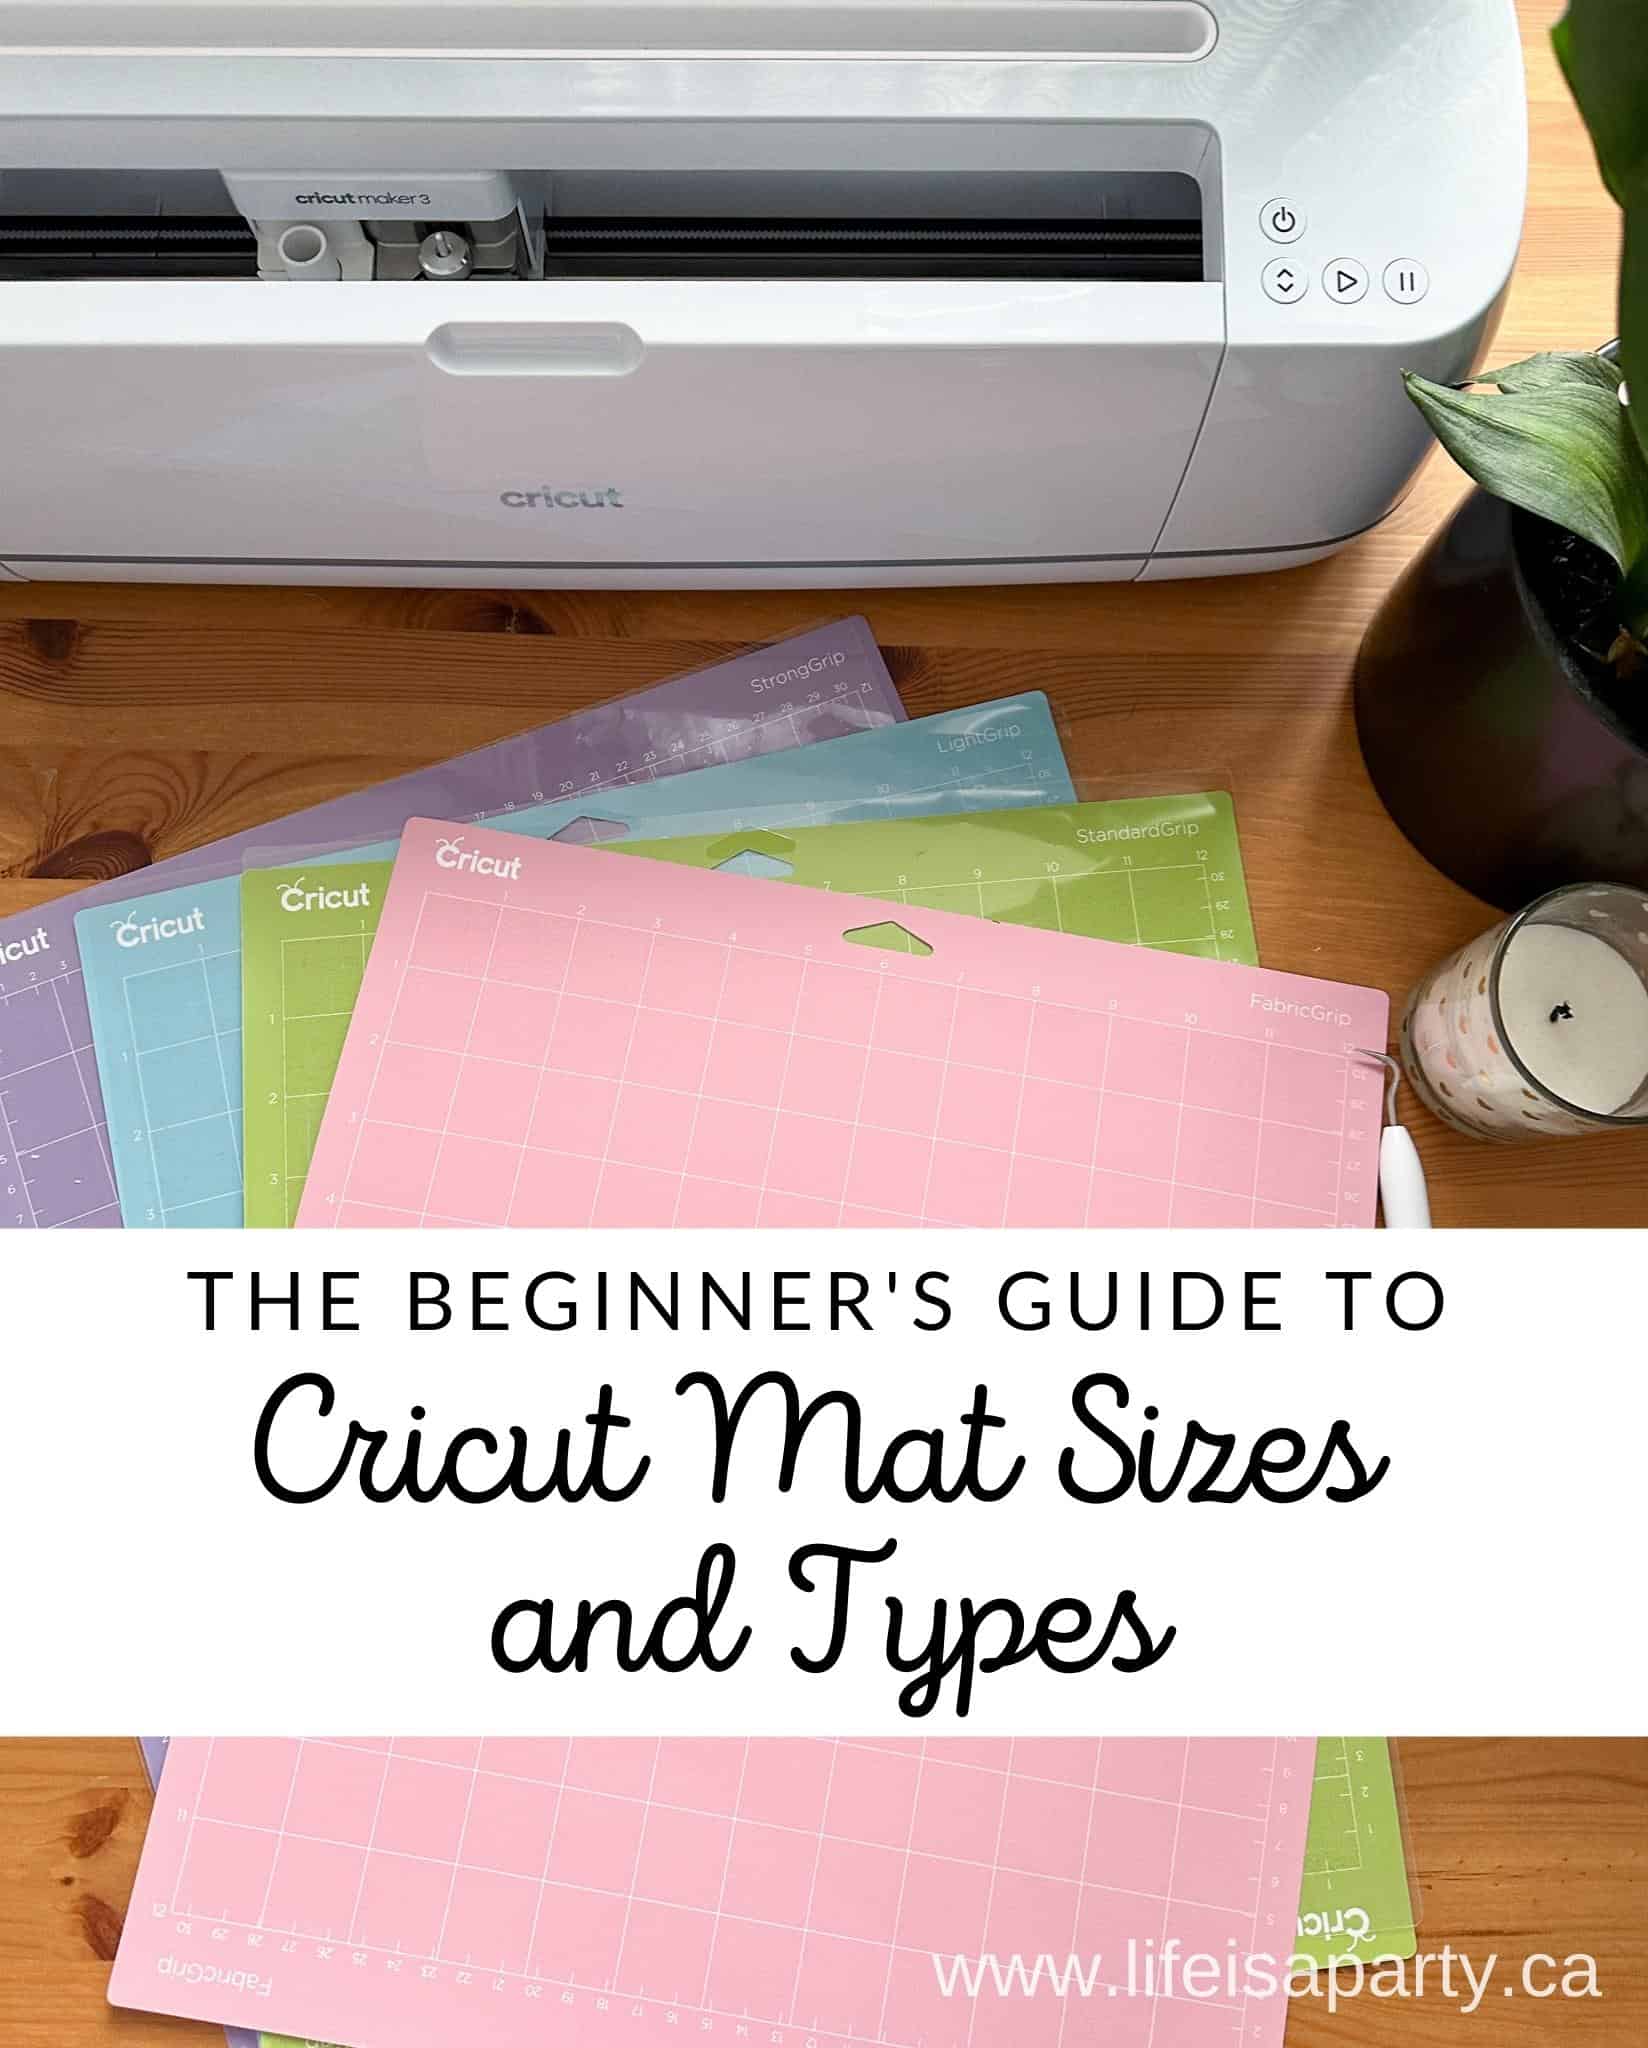 The Beginner’s Guide to Cricut Mat Sizes and Types